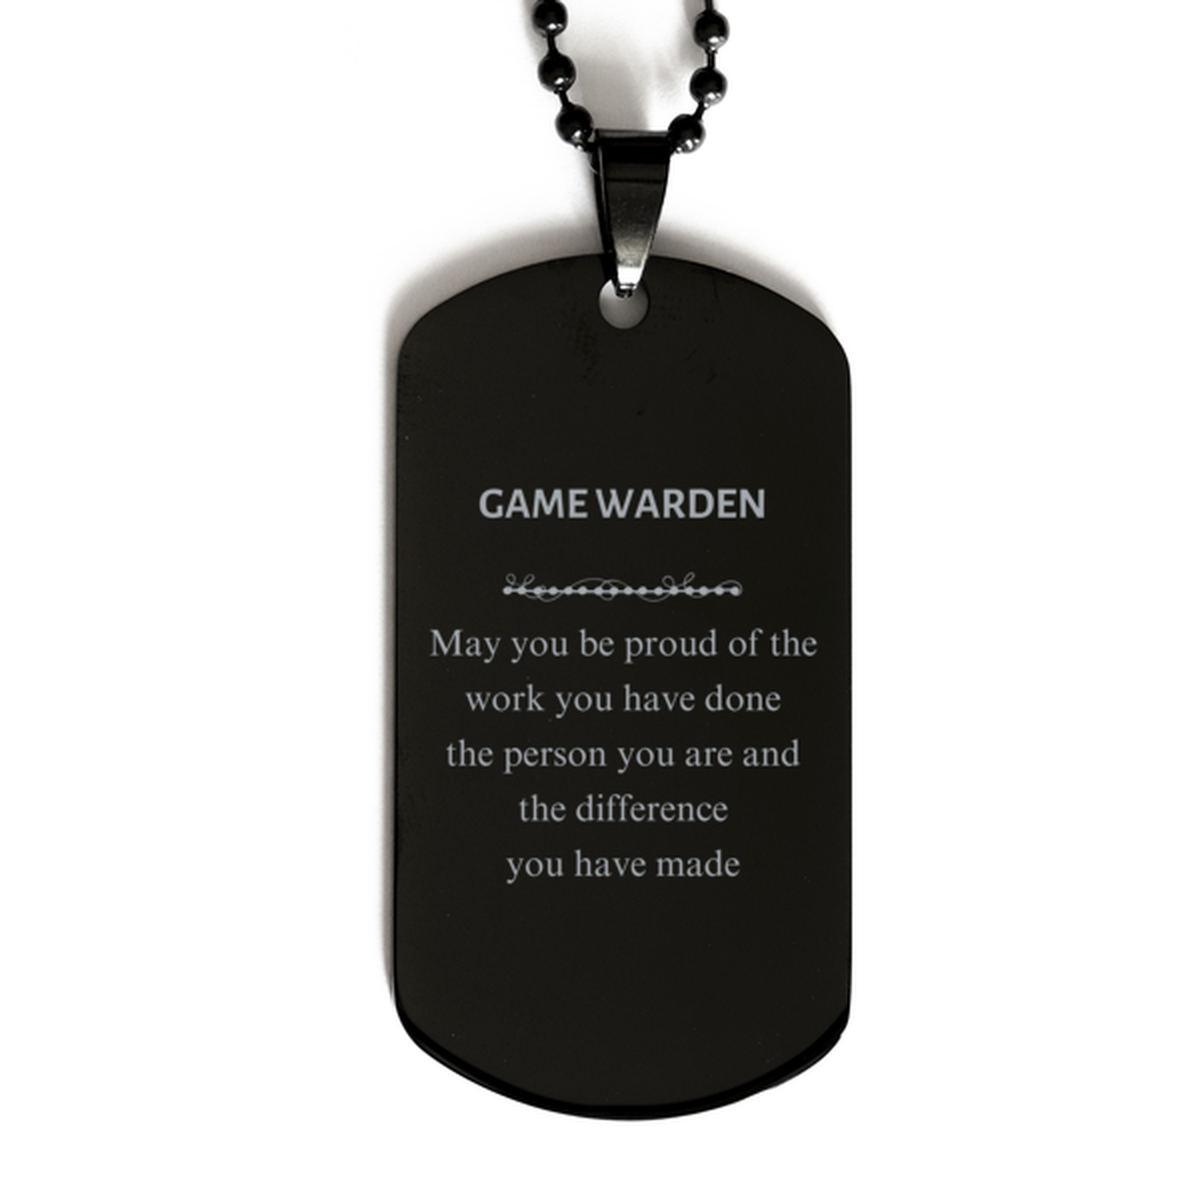 Game Warden May you be proud of the work you have done, Retirement Game Warden Black Dog Tag for Colleague Appreciation Gifts Amazing for Game Warden